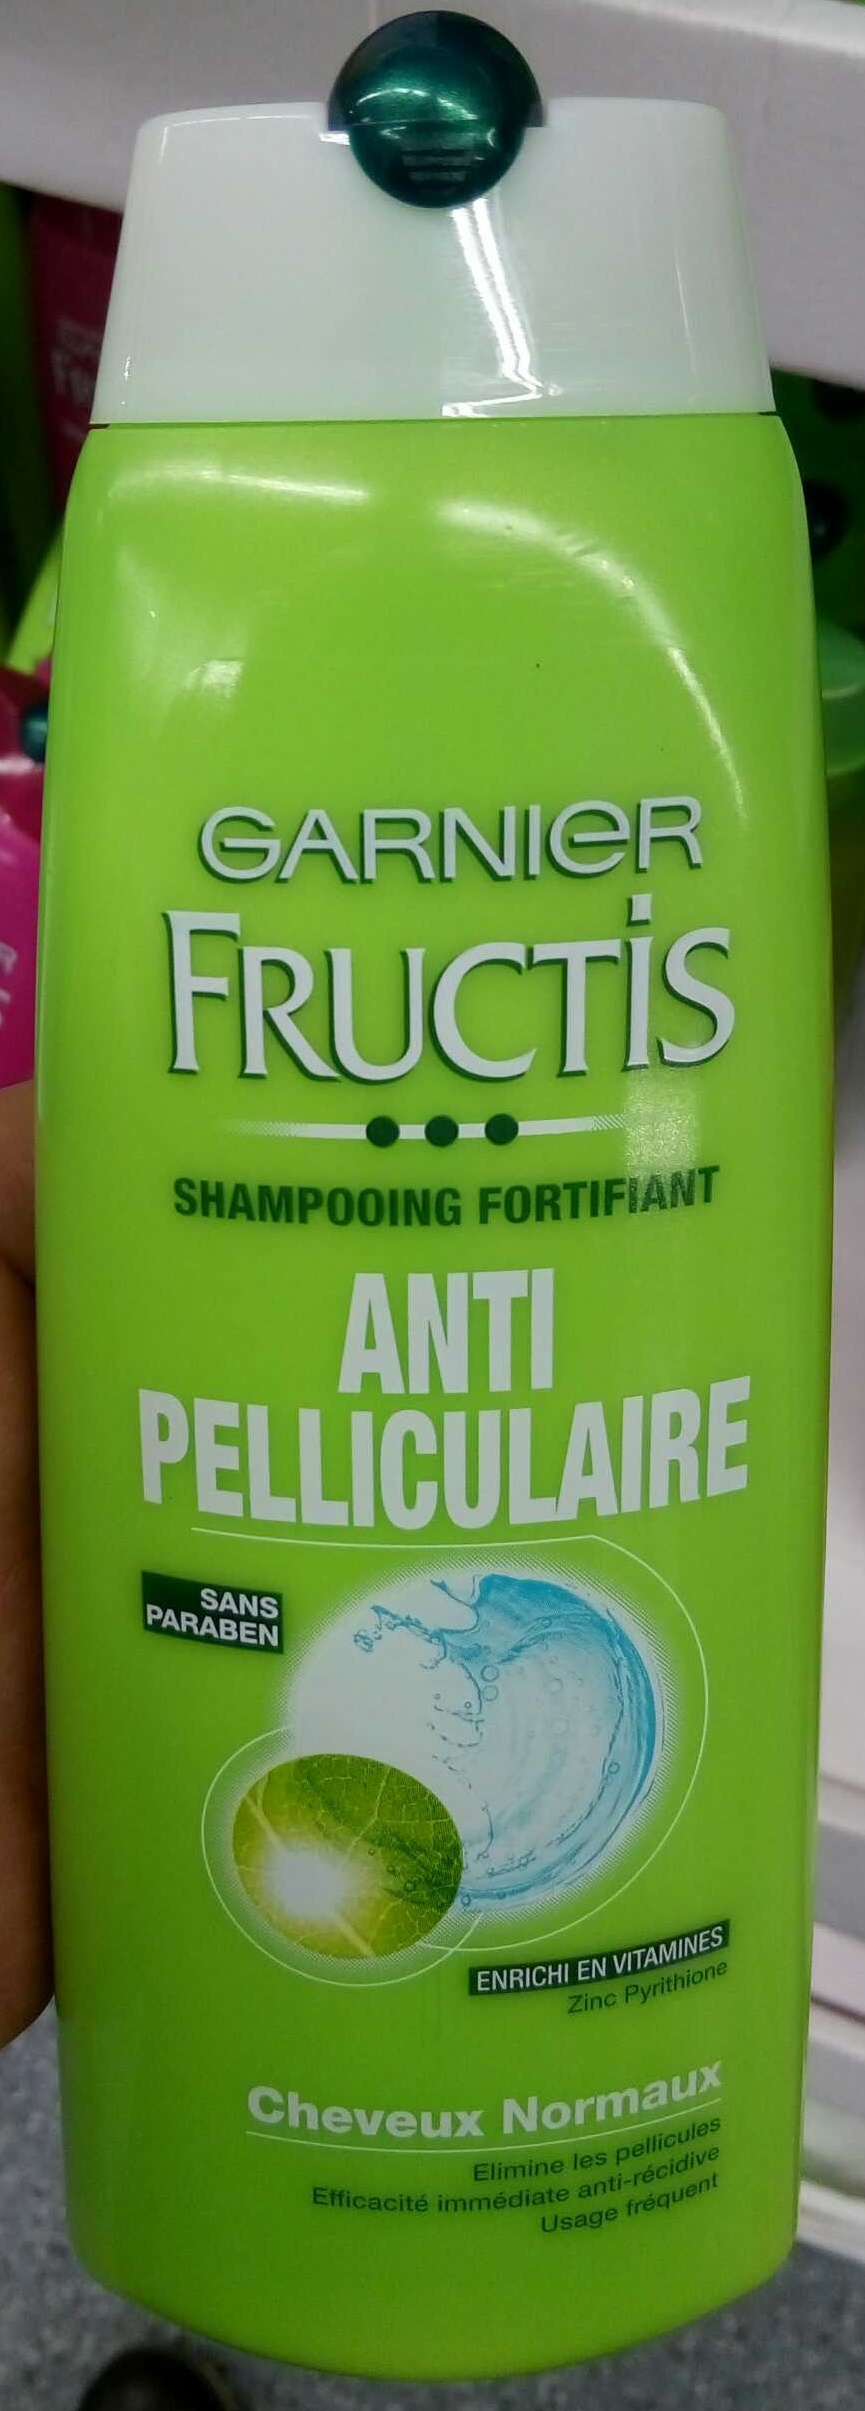 Fructis Shampooing fortifiant anti pelliculaire - Product - fr